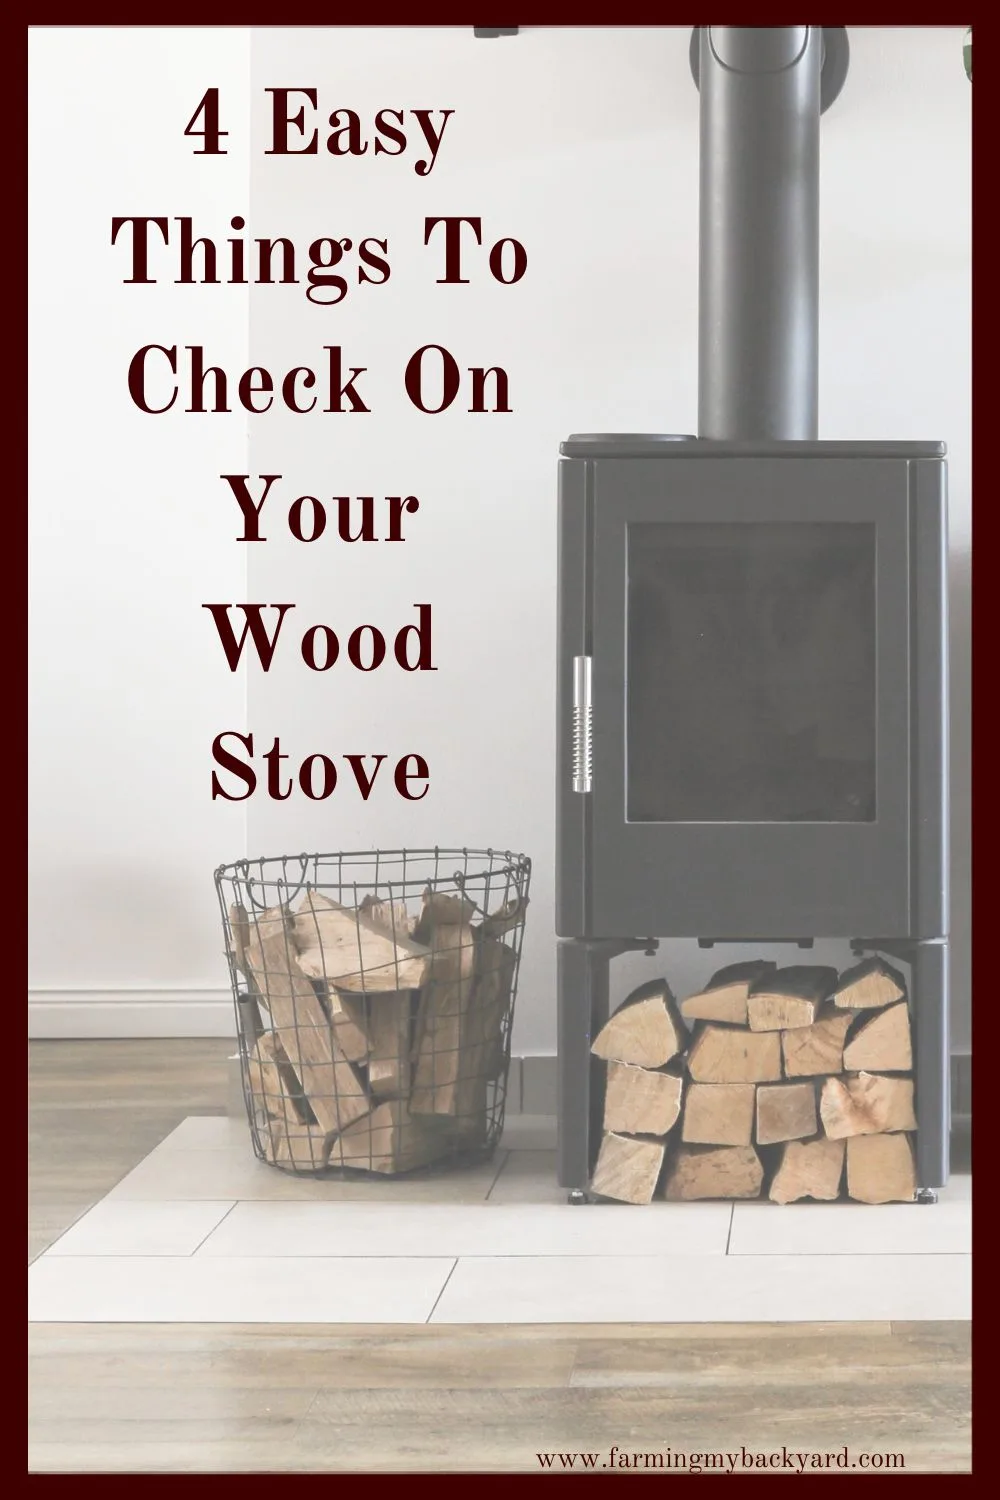 Make sure your wood stove is in great shape for winter.  Here are some things to check before your first fire of the season.